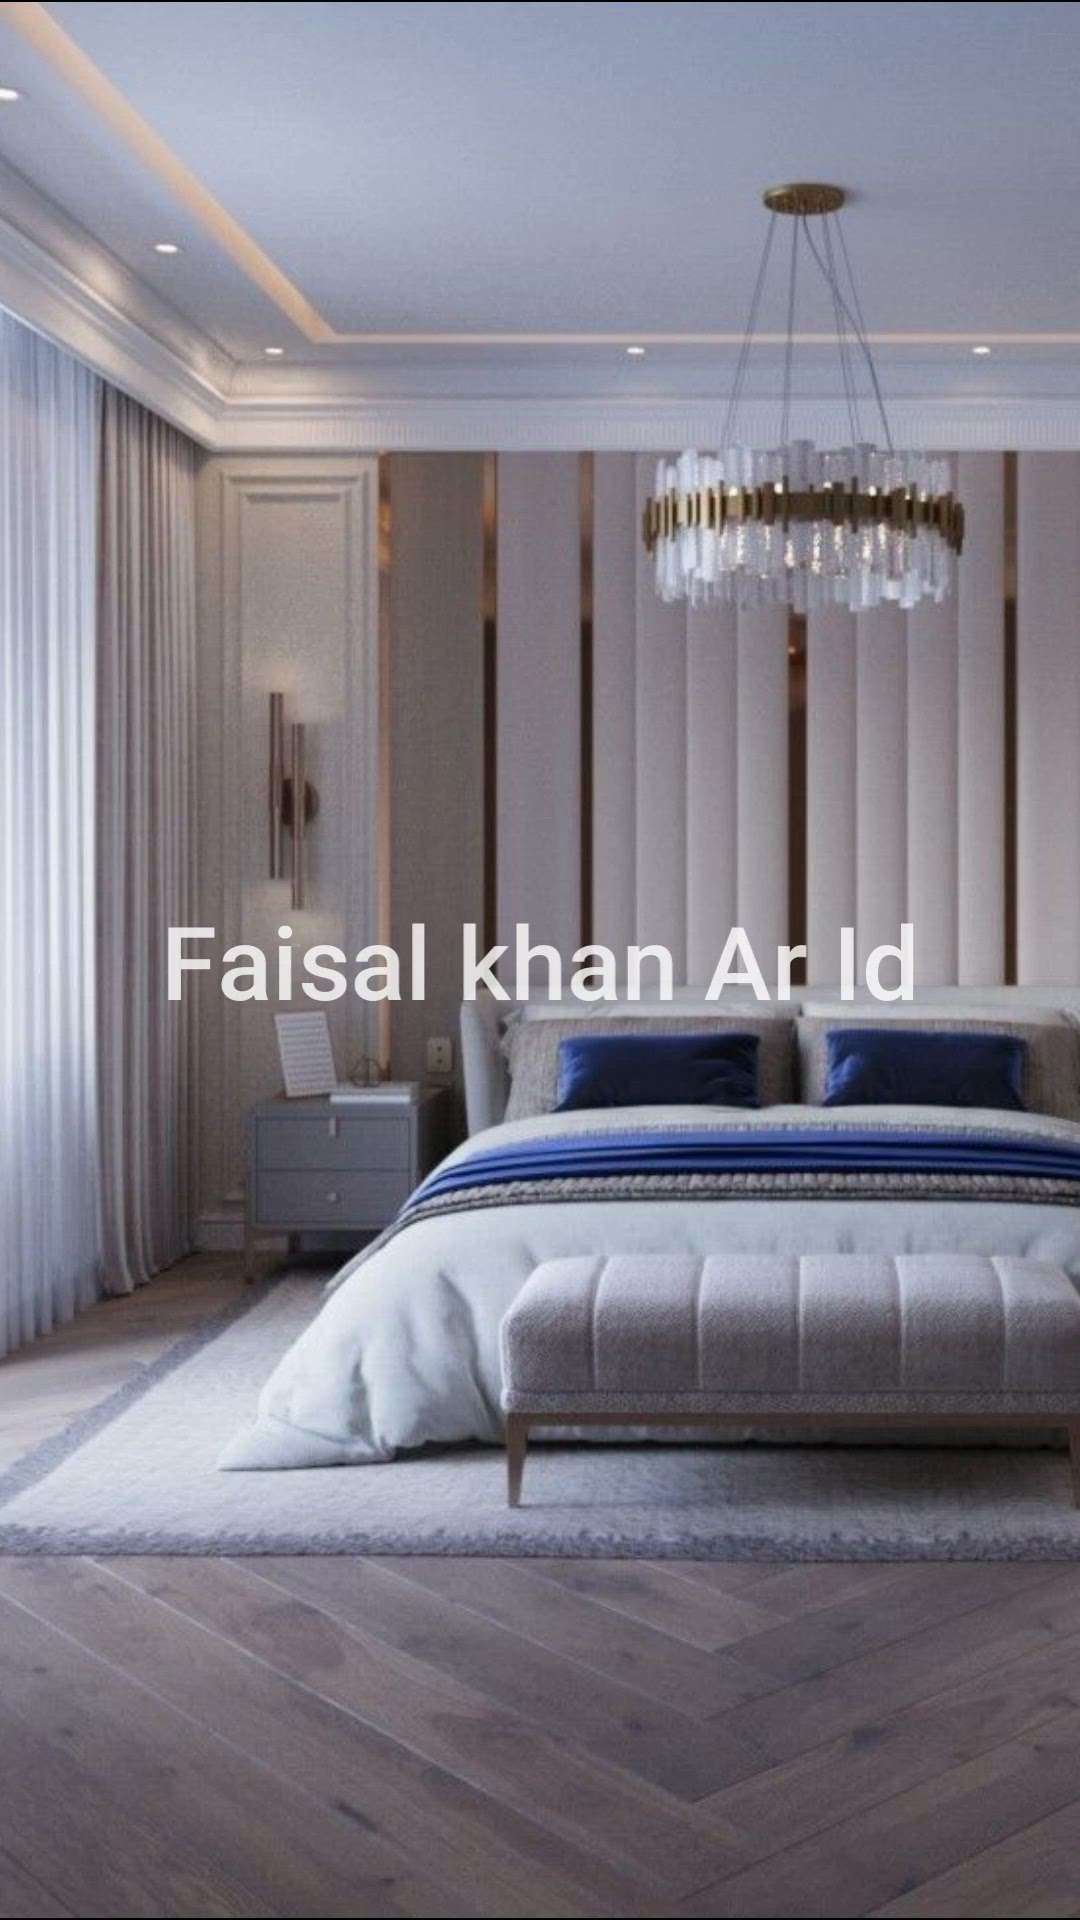 Call Or WhatsApp Faisal Khan: +91‐9024506026

Have A Look At Our Astounding Modern Home Design 

We Are Offering The Following Services 
👉 3D Bungalow Front Eliveshon.👈
👉 3D Bungalow Eliveshon Design.👈
👉 3D Bungalow Day & Night View.👈
👉 3D Bungalow Interior Design.👈
👉 3D Bungalow Landscape Design👈
👉 3D Bungalow Walkthrough.👈

For More Information 
Call Or WhatsApp Faisal Khan: +91‐9024506026

Mail Your Floor Plans 
Email Us On: Faisalkhan3dstudio@gmail.com
.
.
.
.
.
.
.
.
#3d #3dsmax #vray #autocad #photoshop #intiriordesign #extiriordesign #3dmodel #3dvisualization #architecture #intreriordesign #3dartist #Viral  #faisalkhan3dstudio